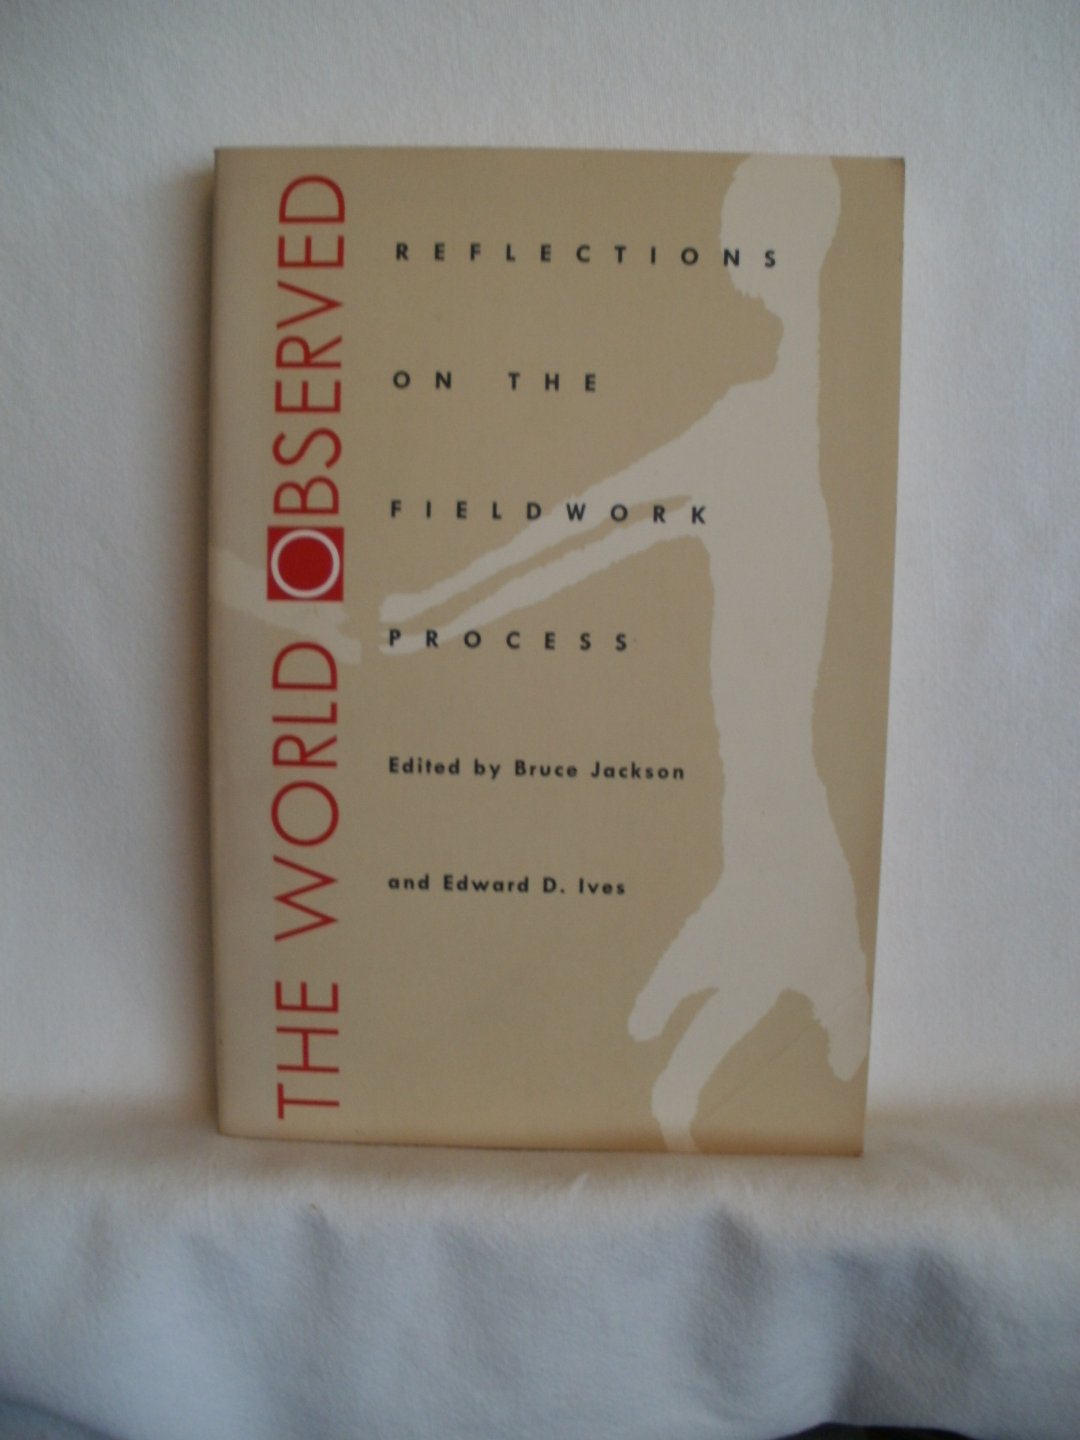 Jackson, Bruce; Ives, Edward D. (eds.) - The World Observed / Reflections on the Fieldwork Process.